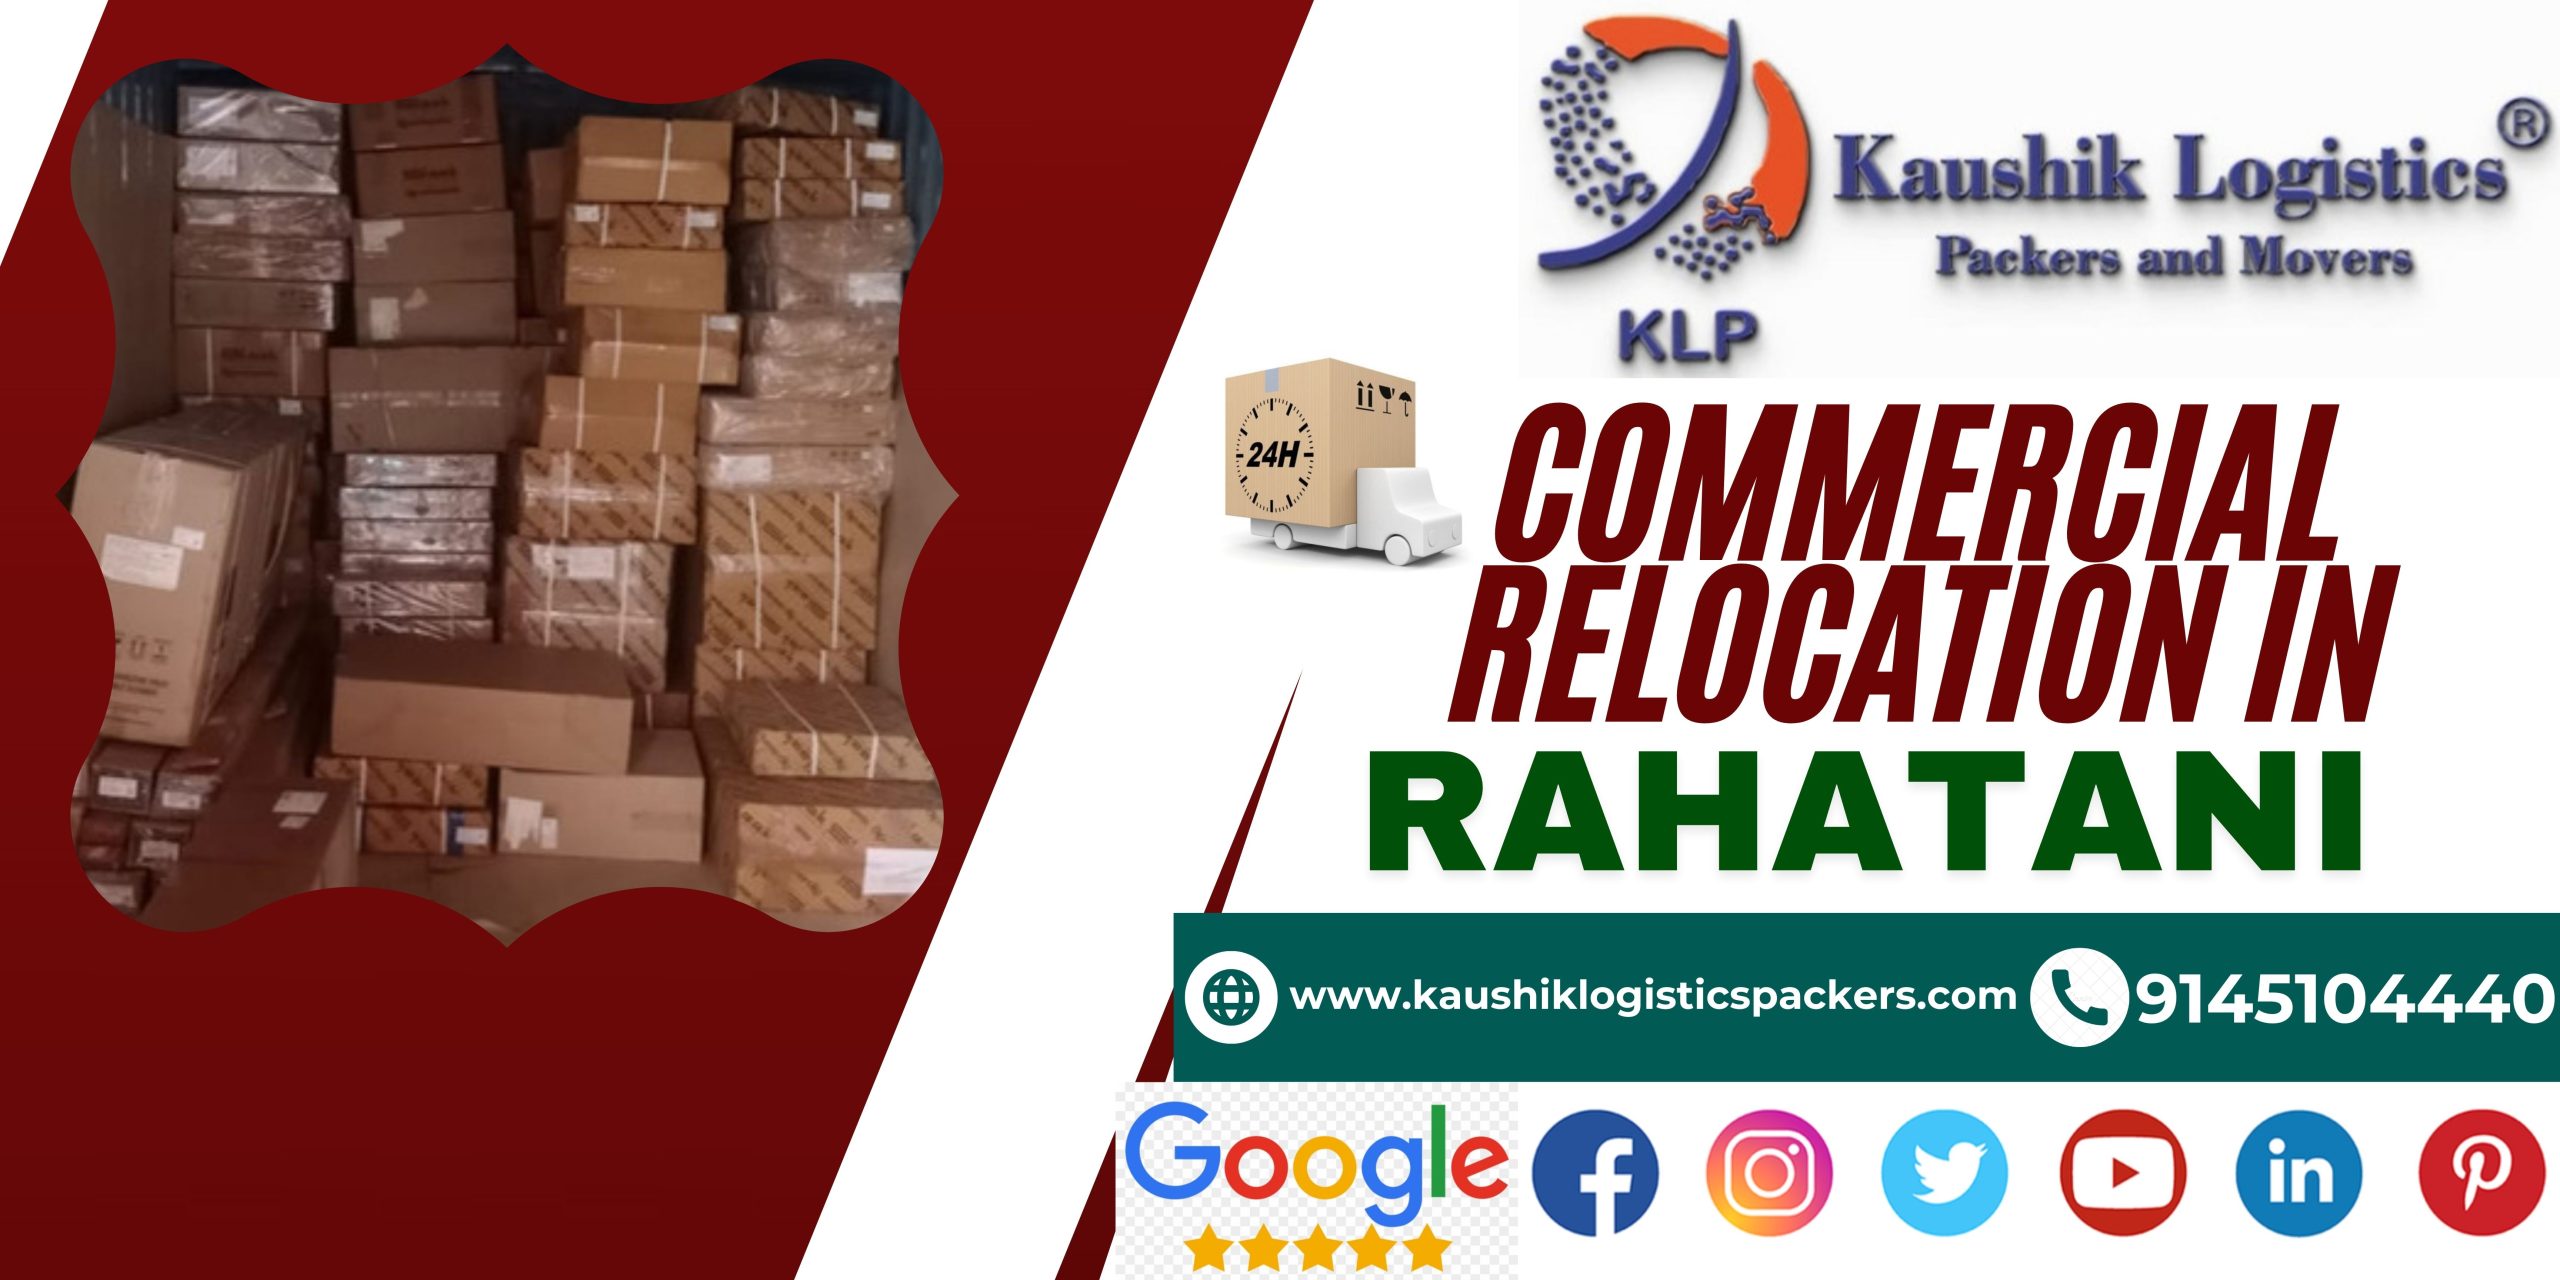 Packers and Movers In Rahatani